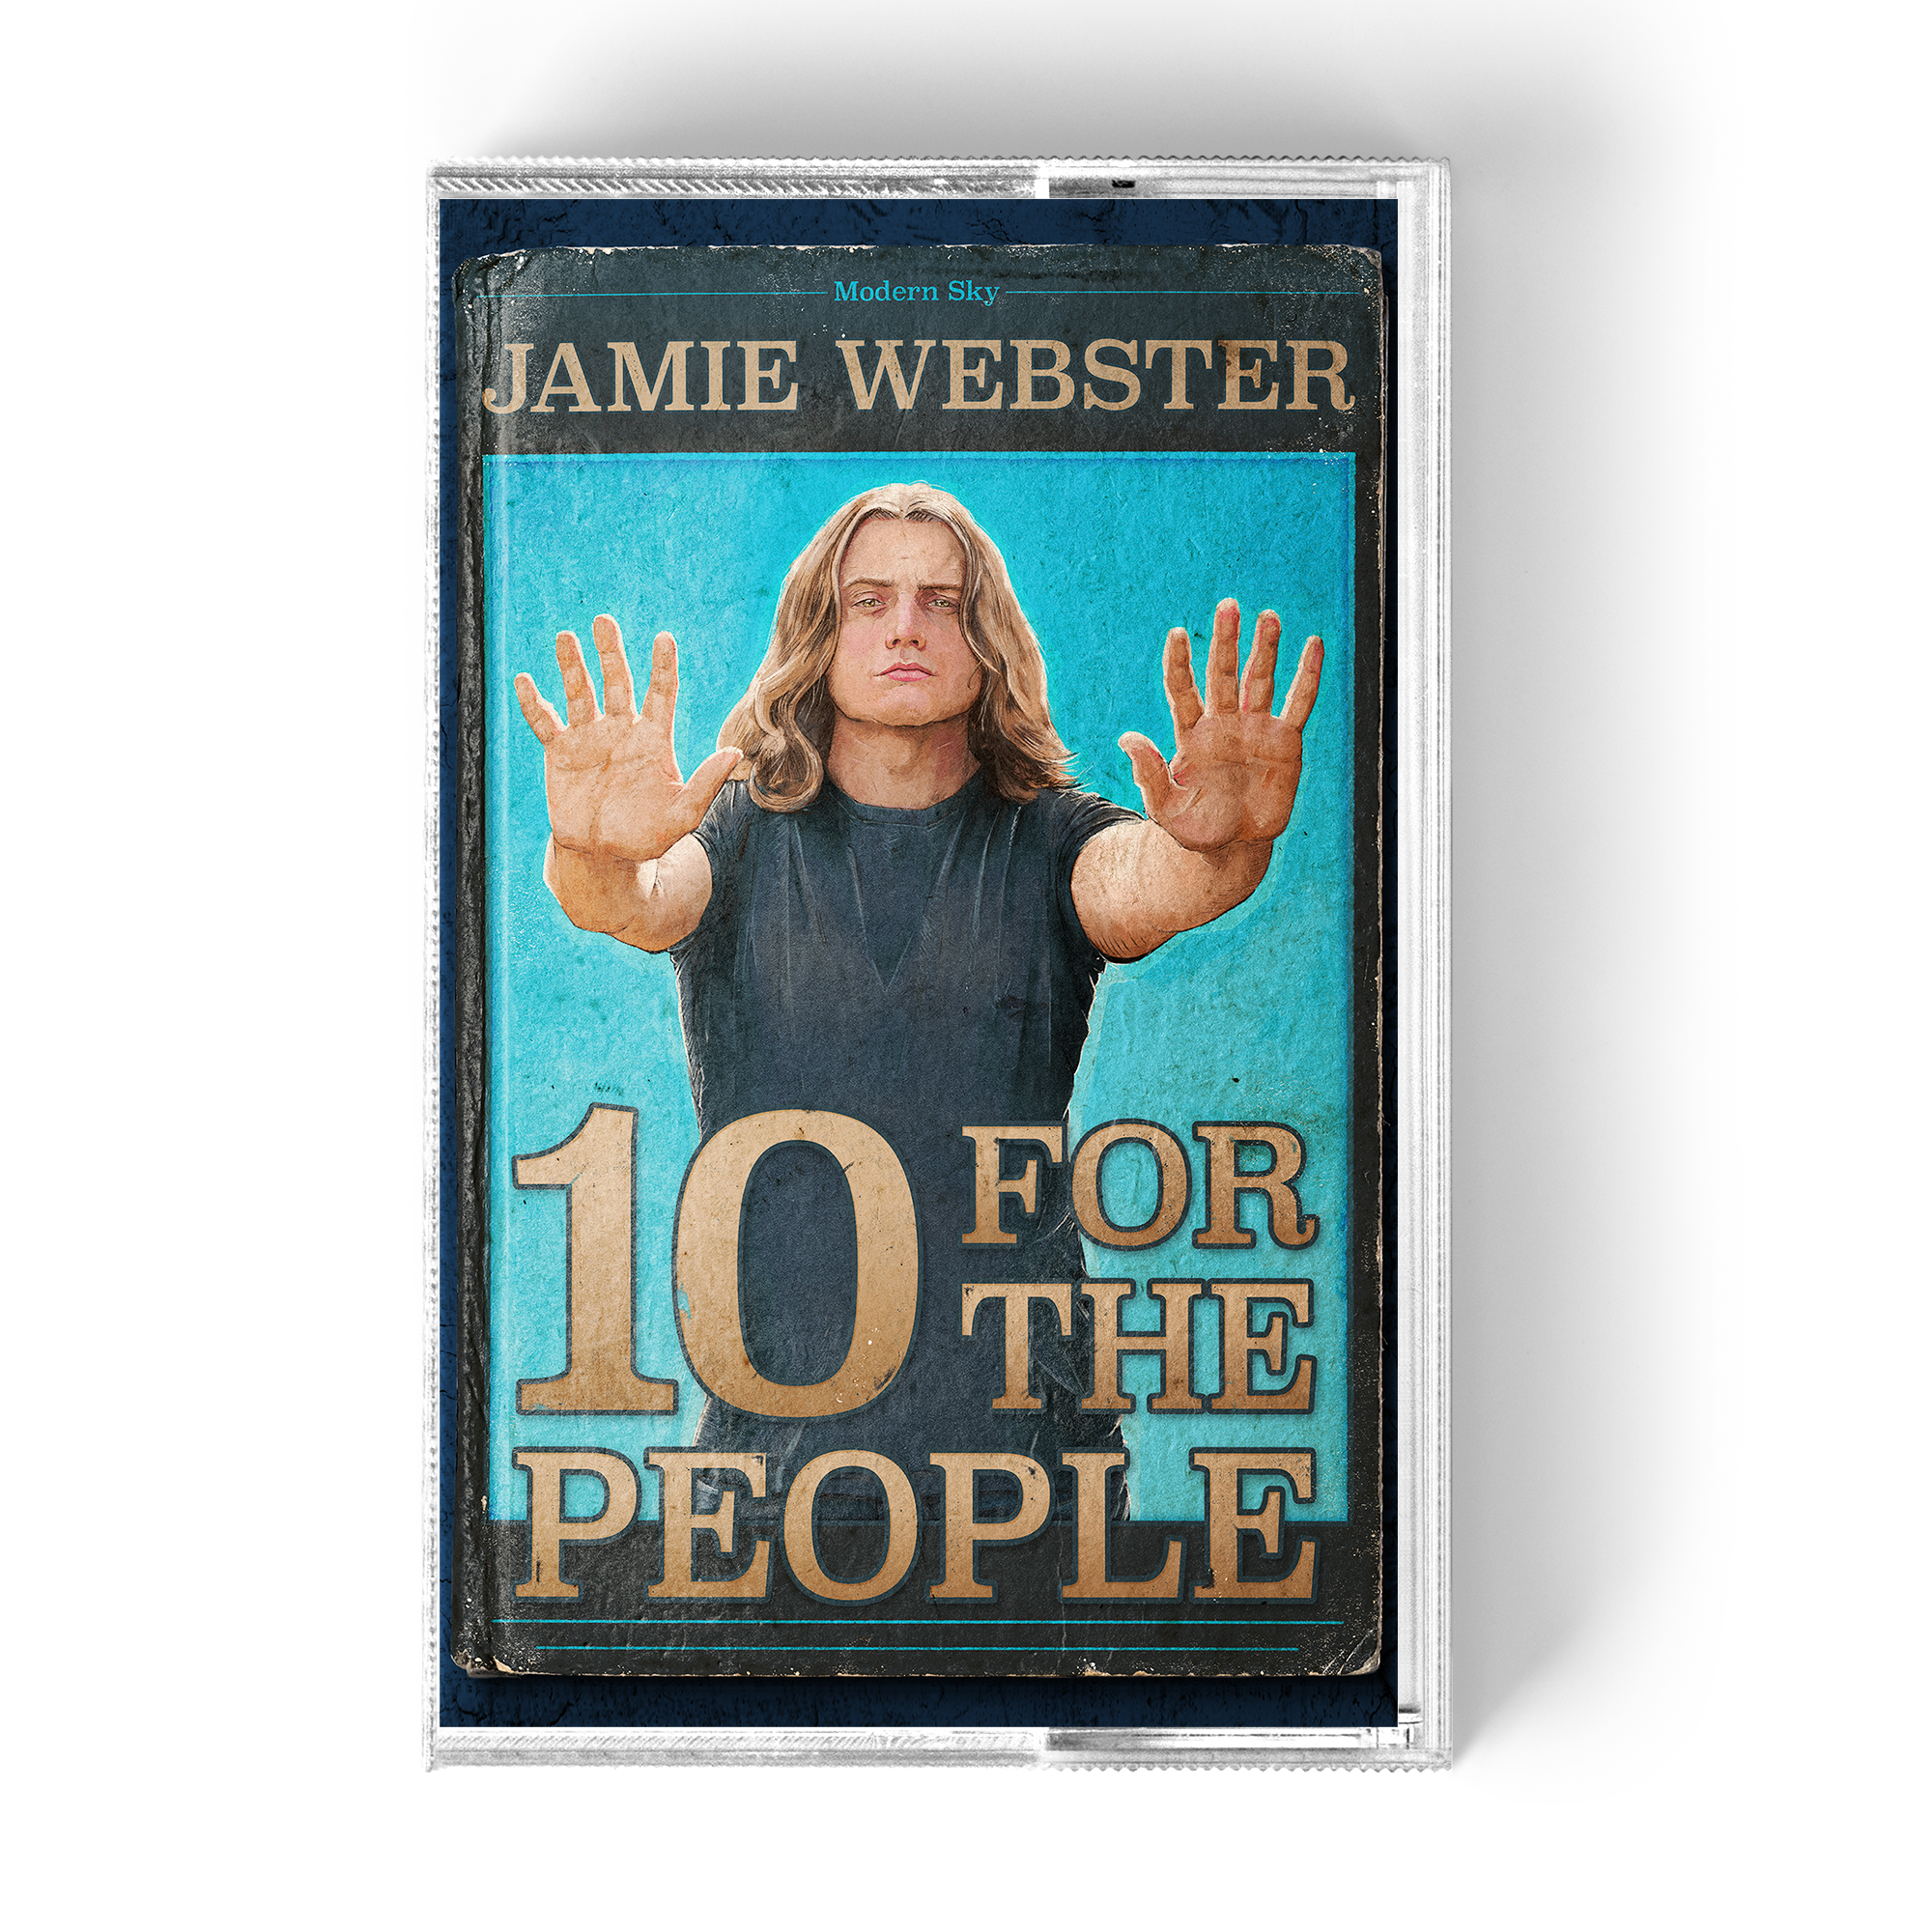 Jamie Webster - 10 For The People: Exclusive Signed Cassette